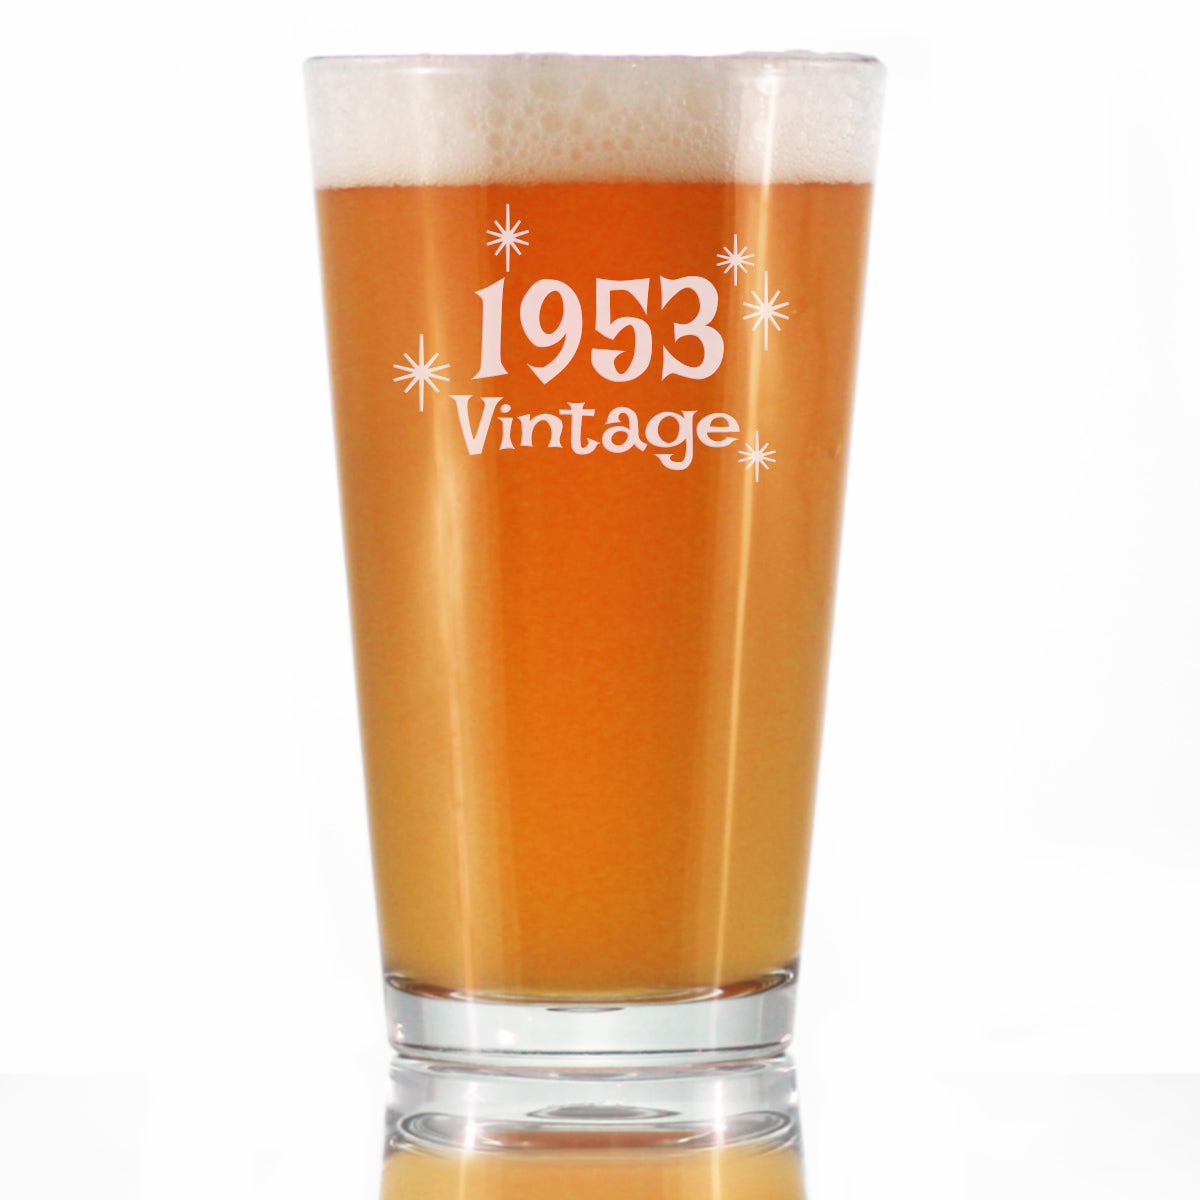 Vintage 1953 - Pint Glass for Beer - 70th Birthday Gifts for Men or Women Turning 70 - Fun Bday Party Decor - 16 oz